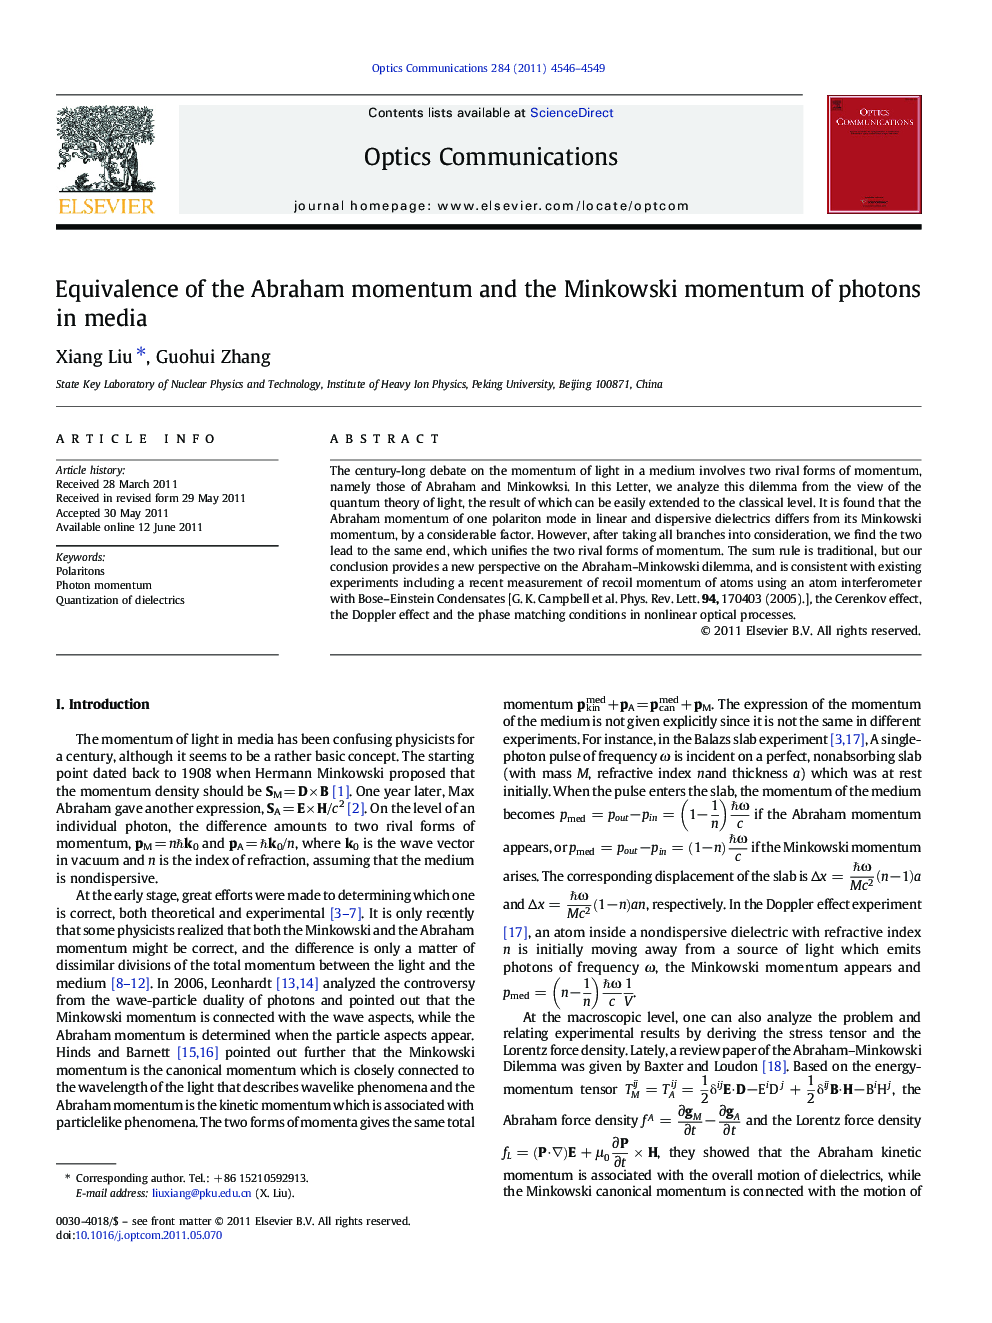 Equivalence of the Abraham momentum and the Minkowski momentum of photons in media